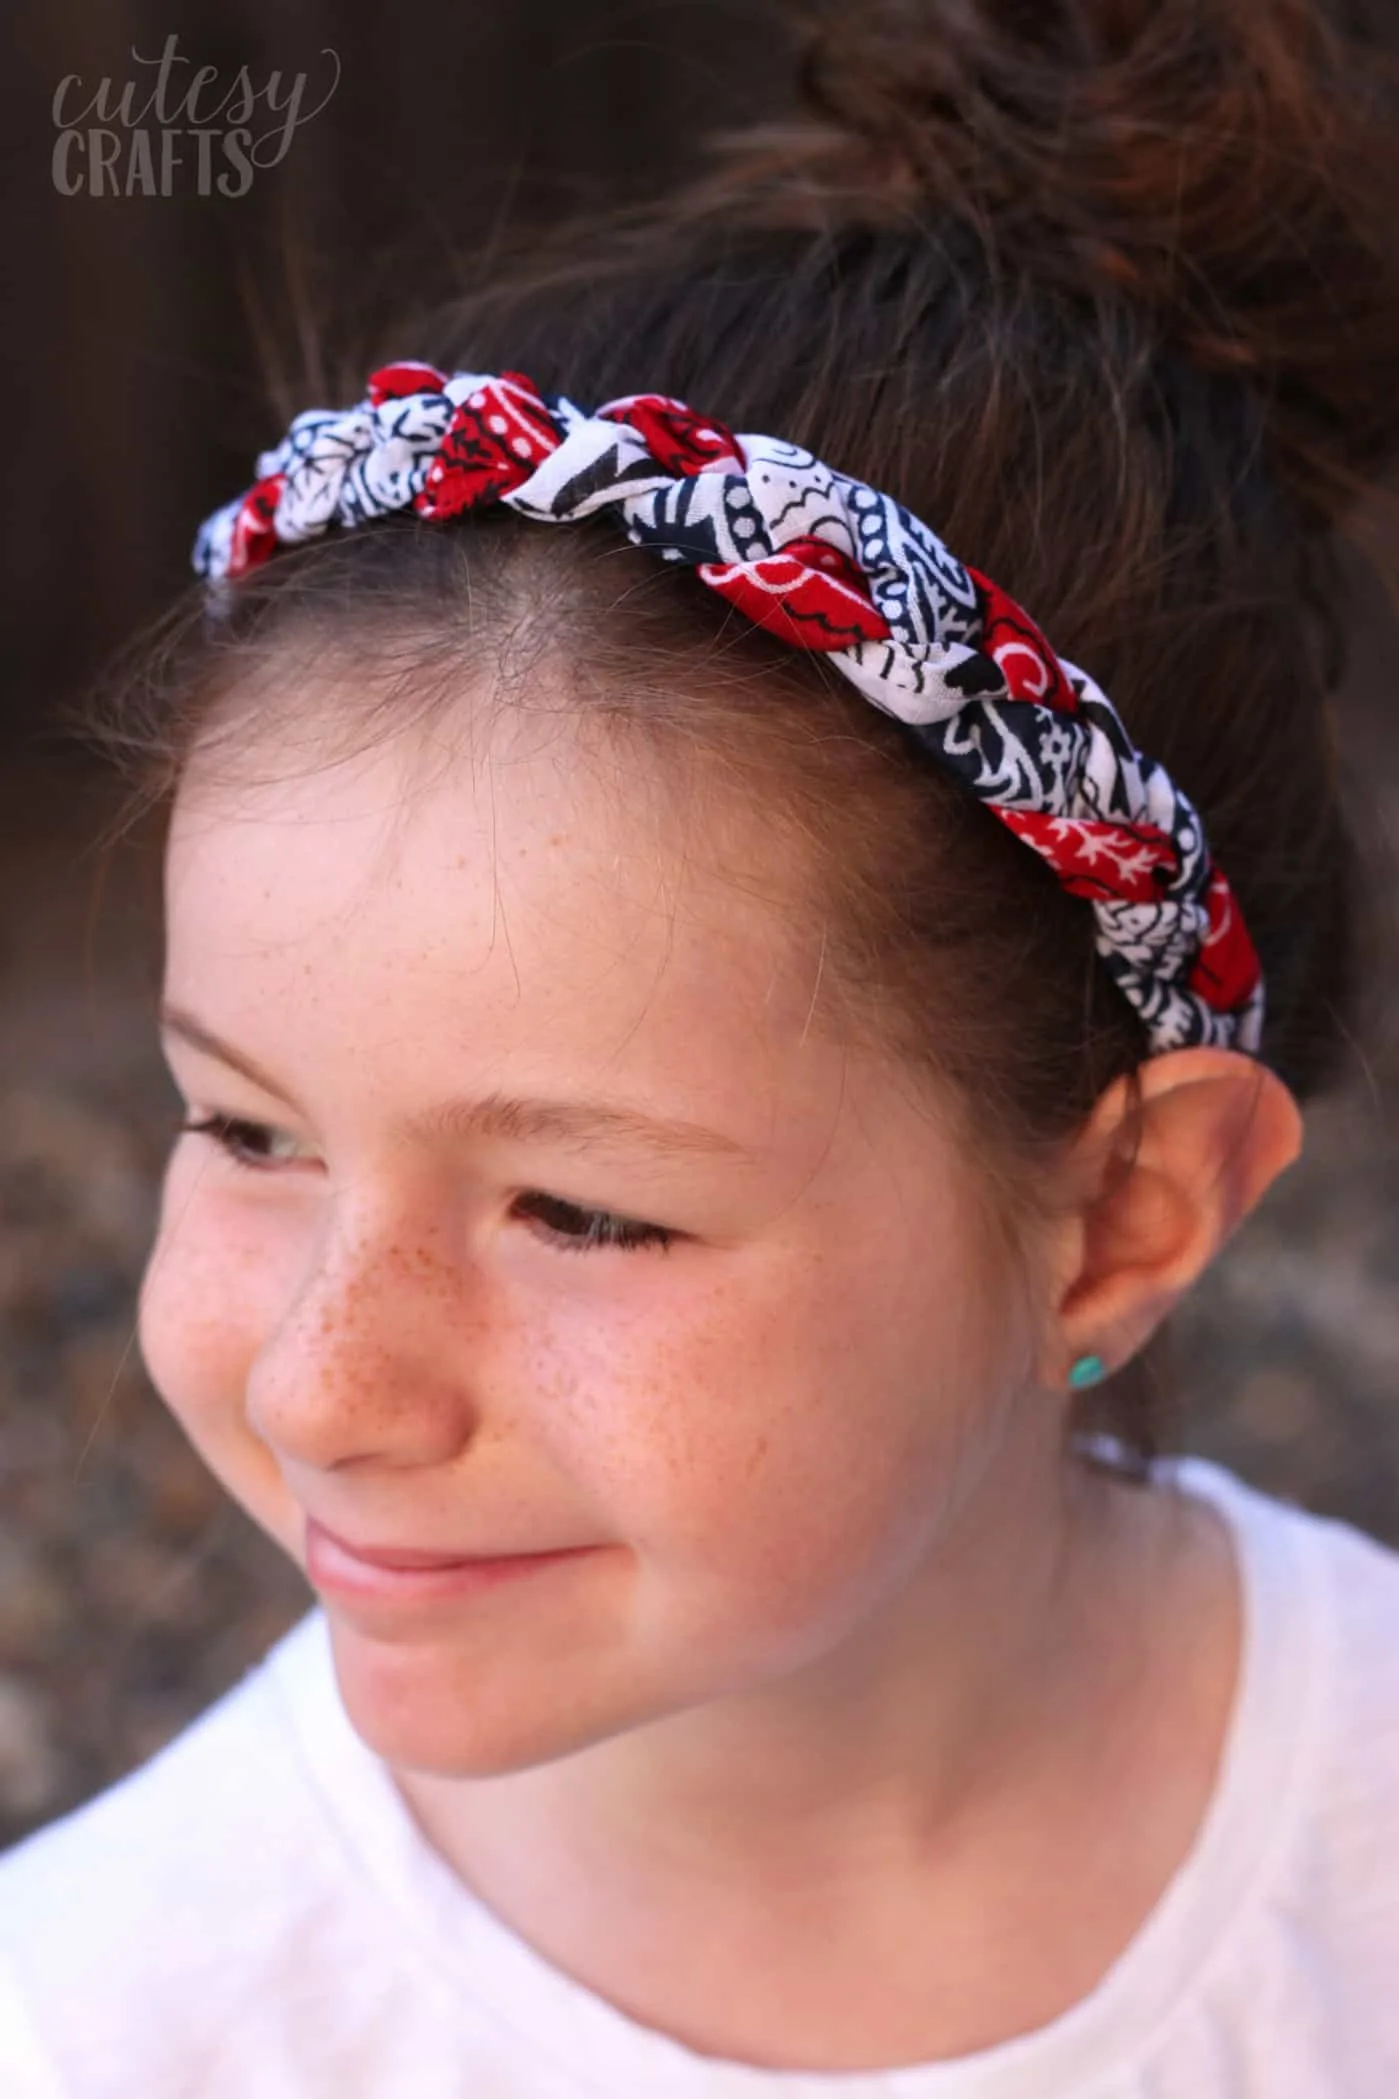 Use inexpensive bandanas and your sewing machine to make these festive bandana headbands. Customize them with any colors you like - so fun!